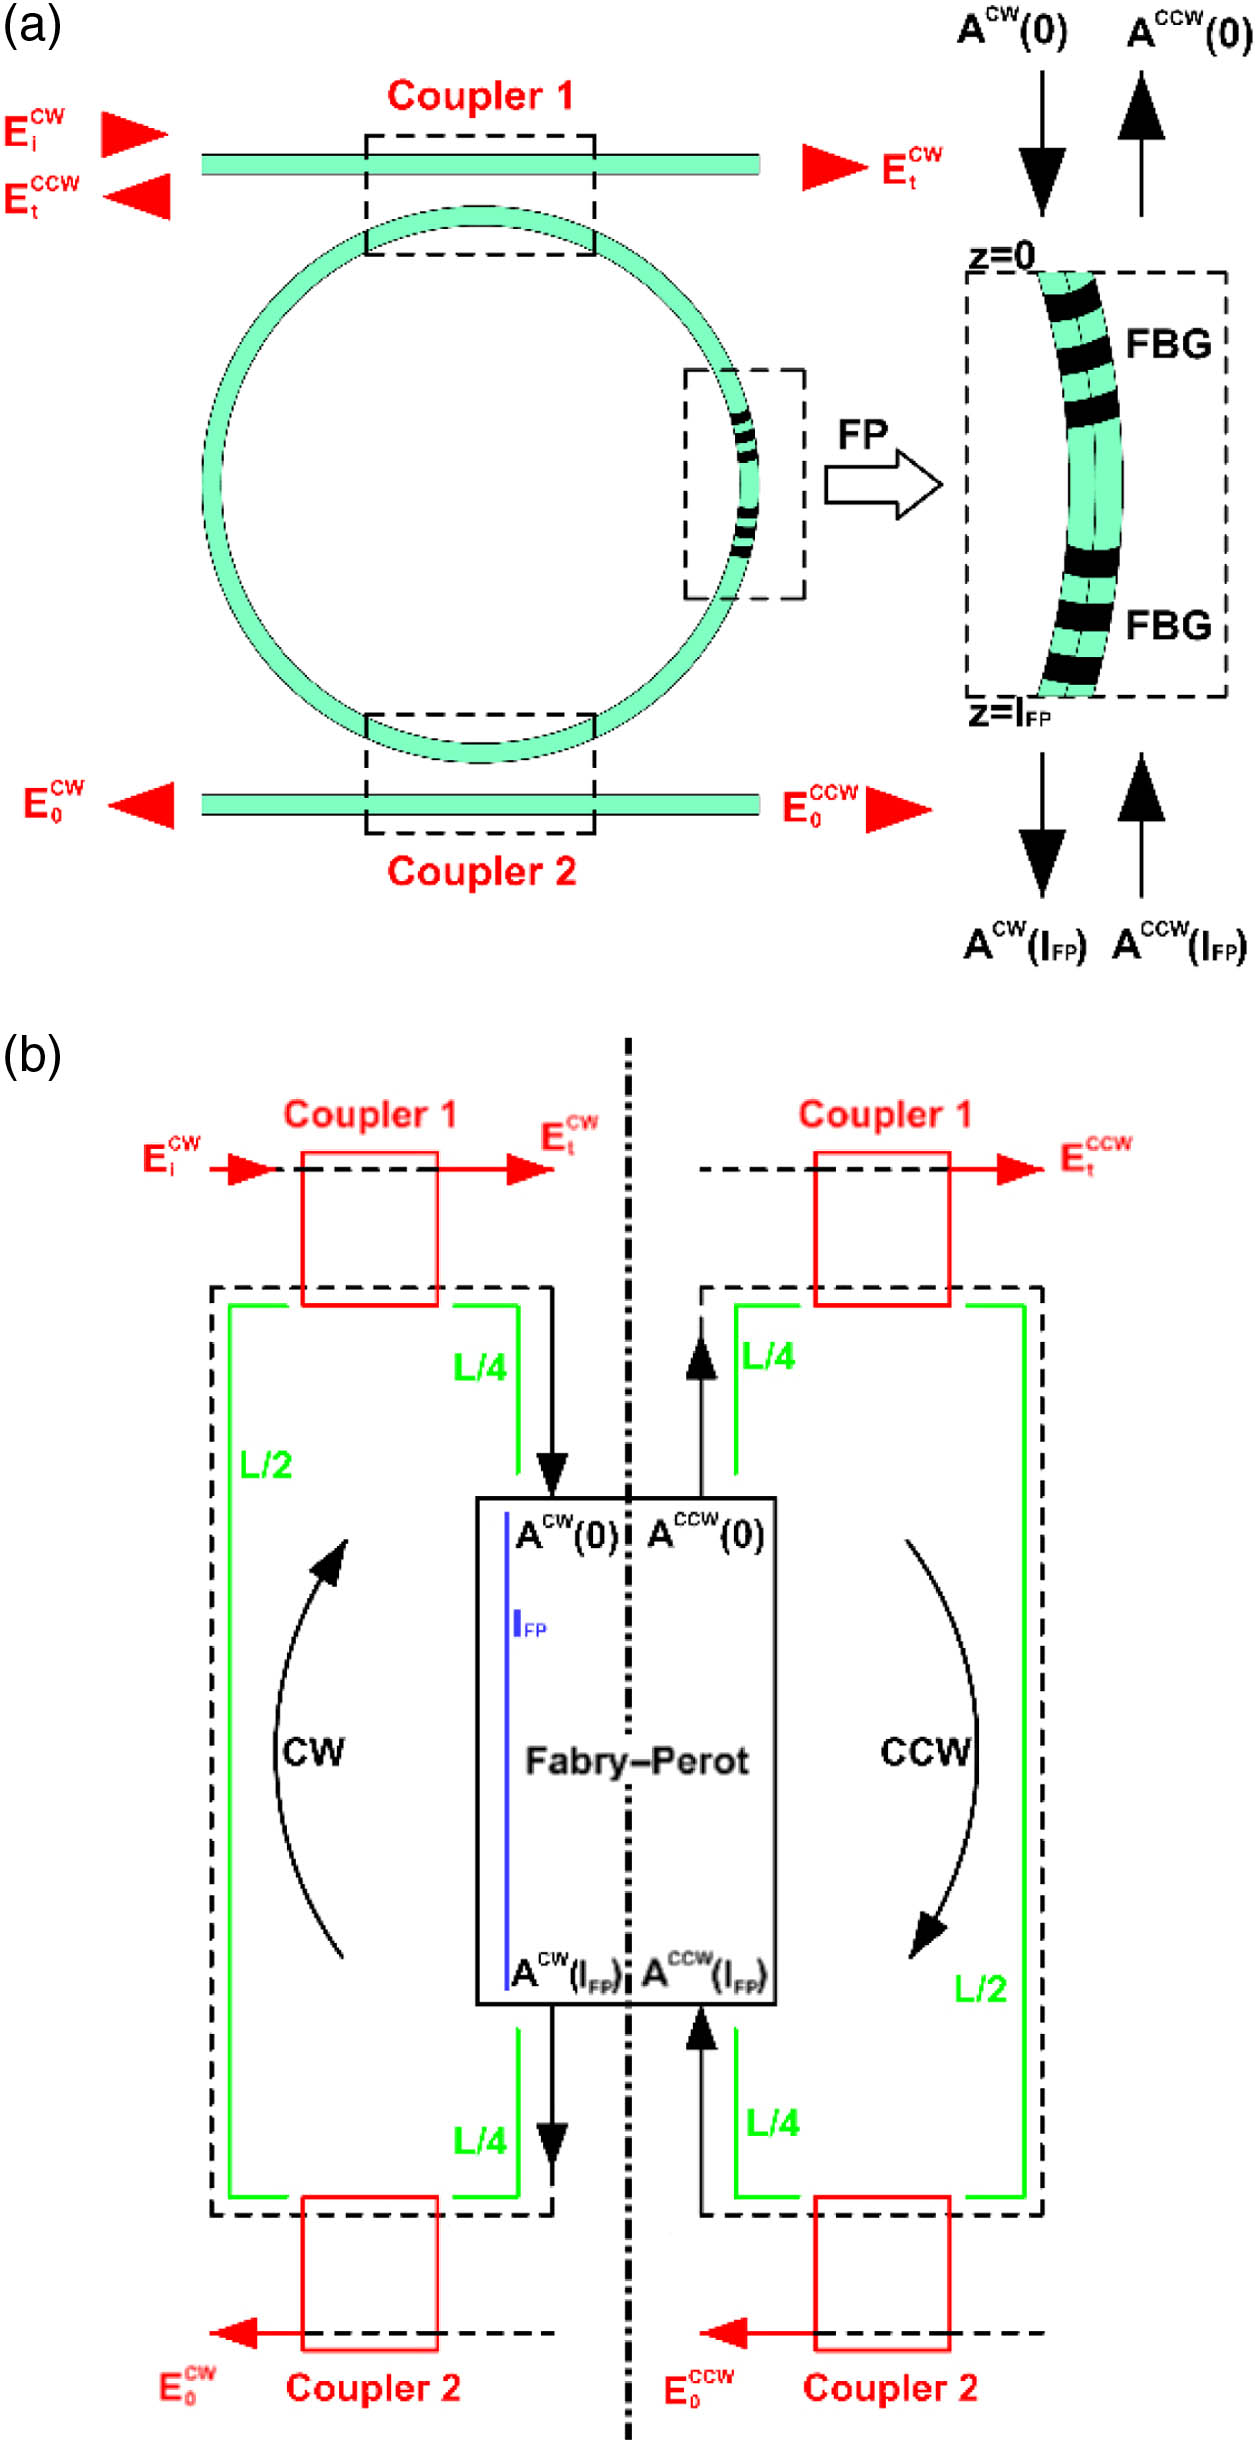 (a) Physical system consisting of a Fabry–Perot (FP) cavity, made by two fiber Bragg gratings (FBGs) separated by a distance lFP enclosed in an optical fiber loop and excited by EiCW through coupler 1. ACW(0), ACCW(0) are the two counter-propagating modes at the input port (z=0), and ACW(lFP), ACCW(lFP) are the two counter-propagating modes at the output port (z=lFP). (b) Flux diagram of the physical system where two counter-propagating modes (CW and CCW) are excited.